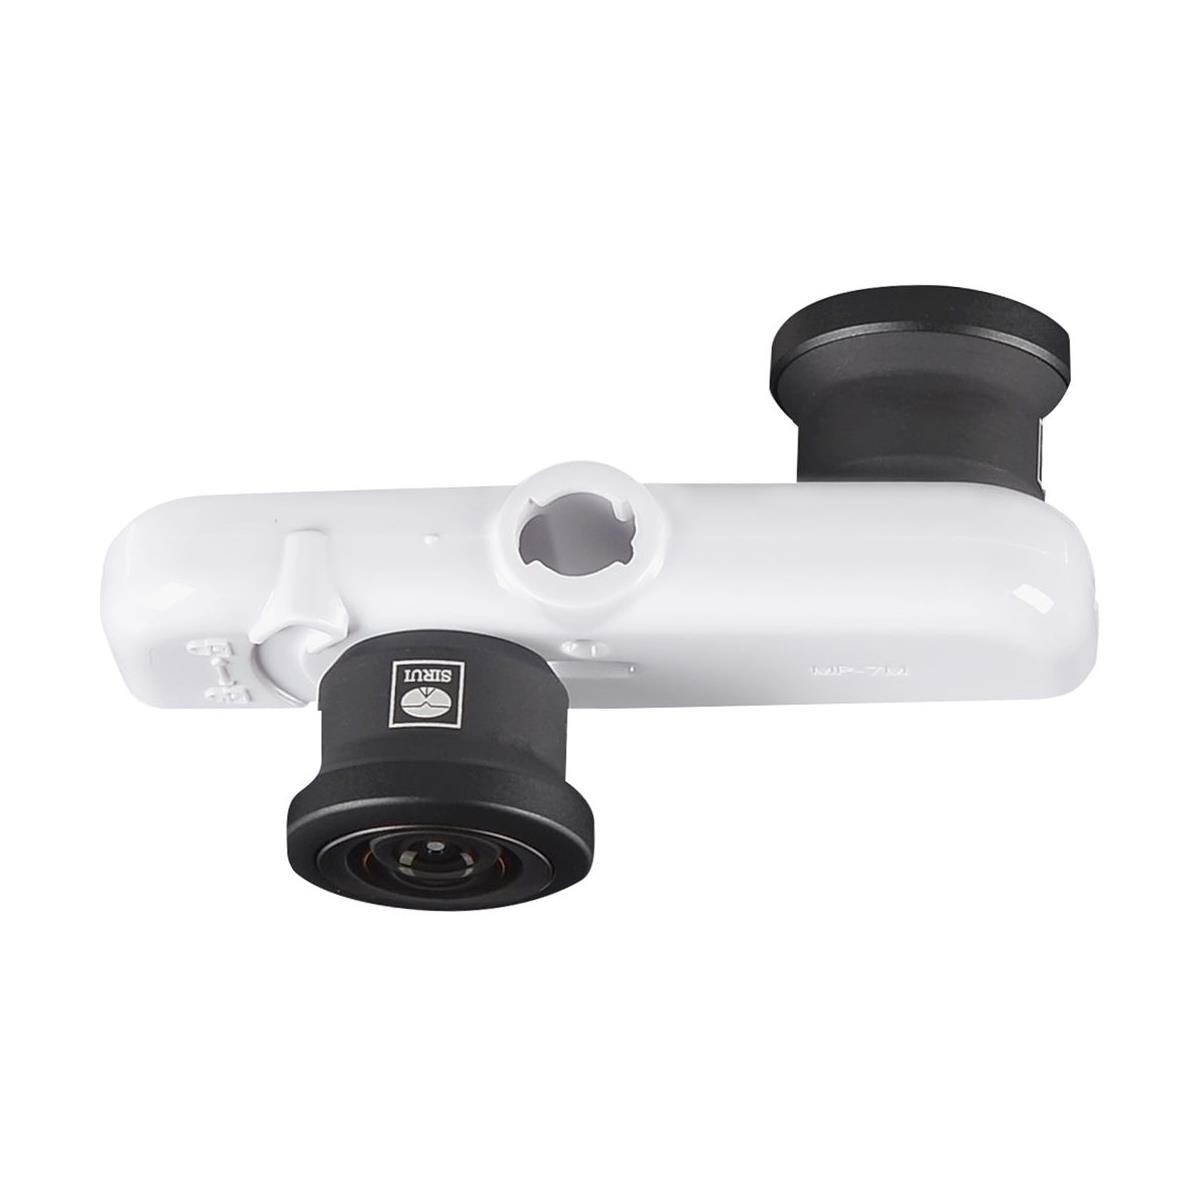 Image of Sirui SUMP-7W360L2 360 Degree Mount Lens Kit for iPhone 7